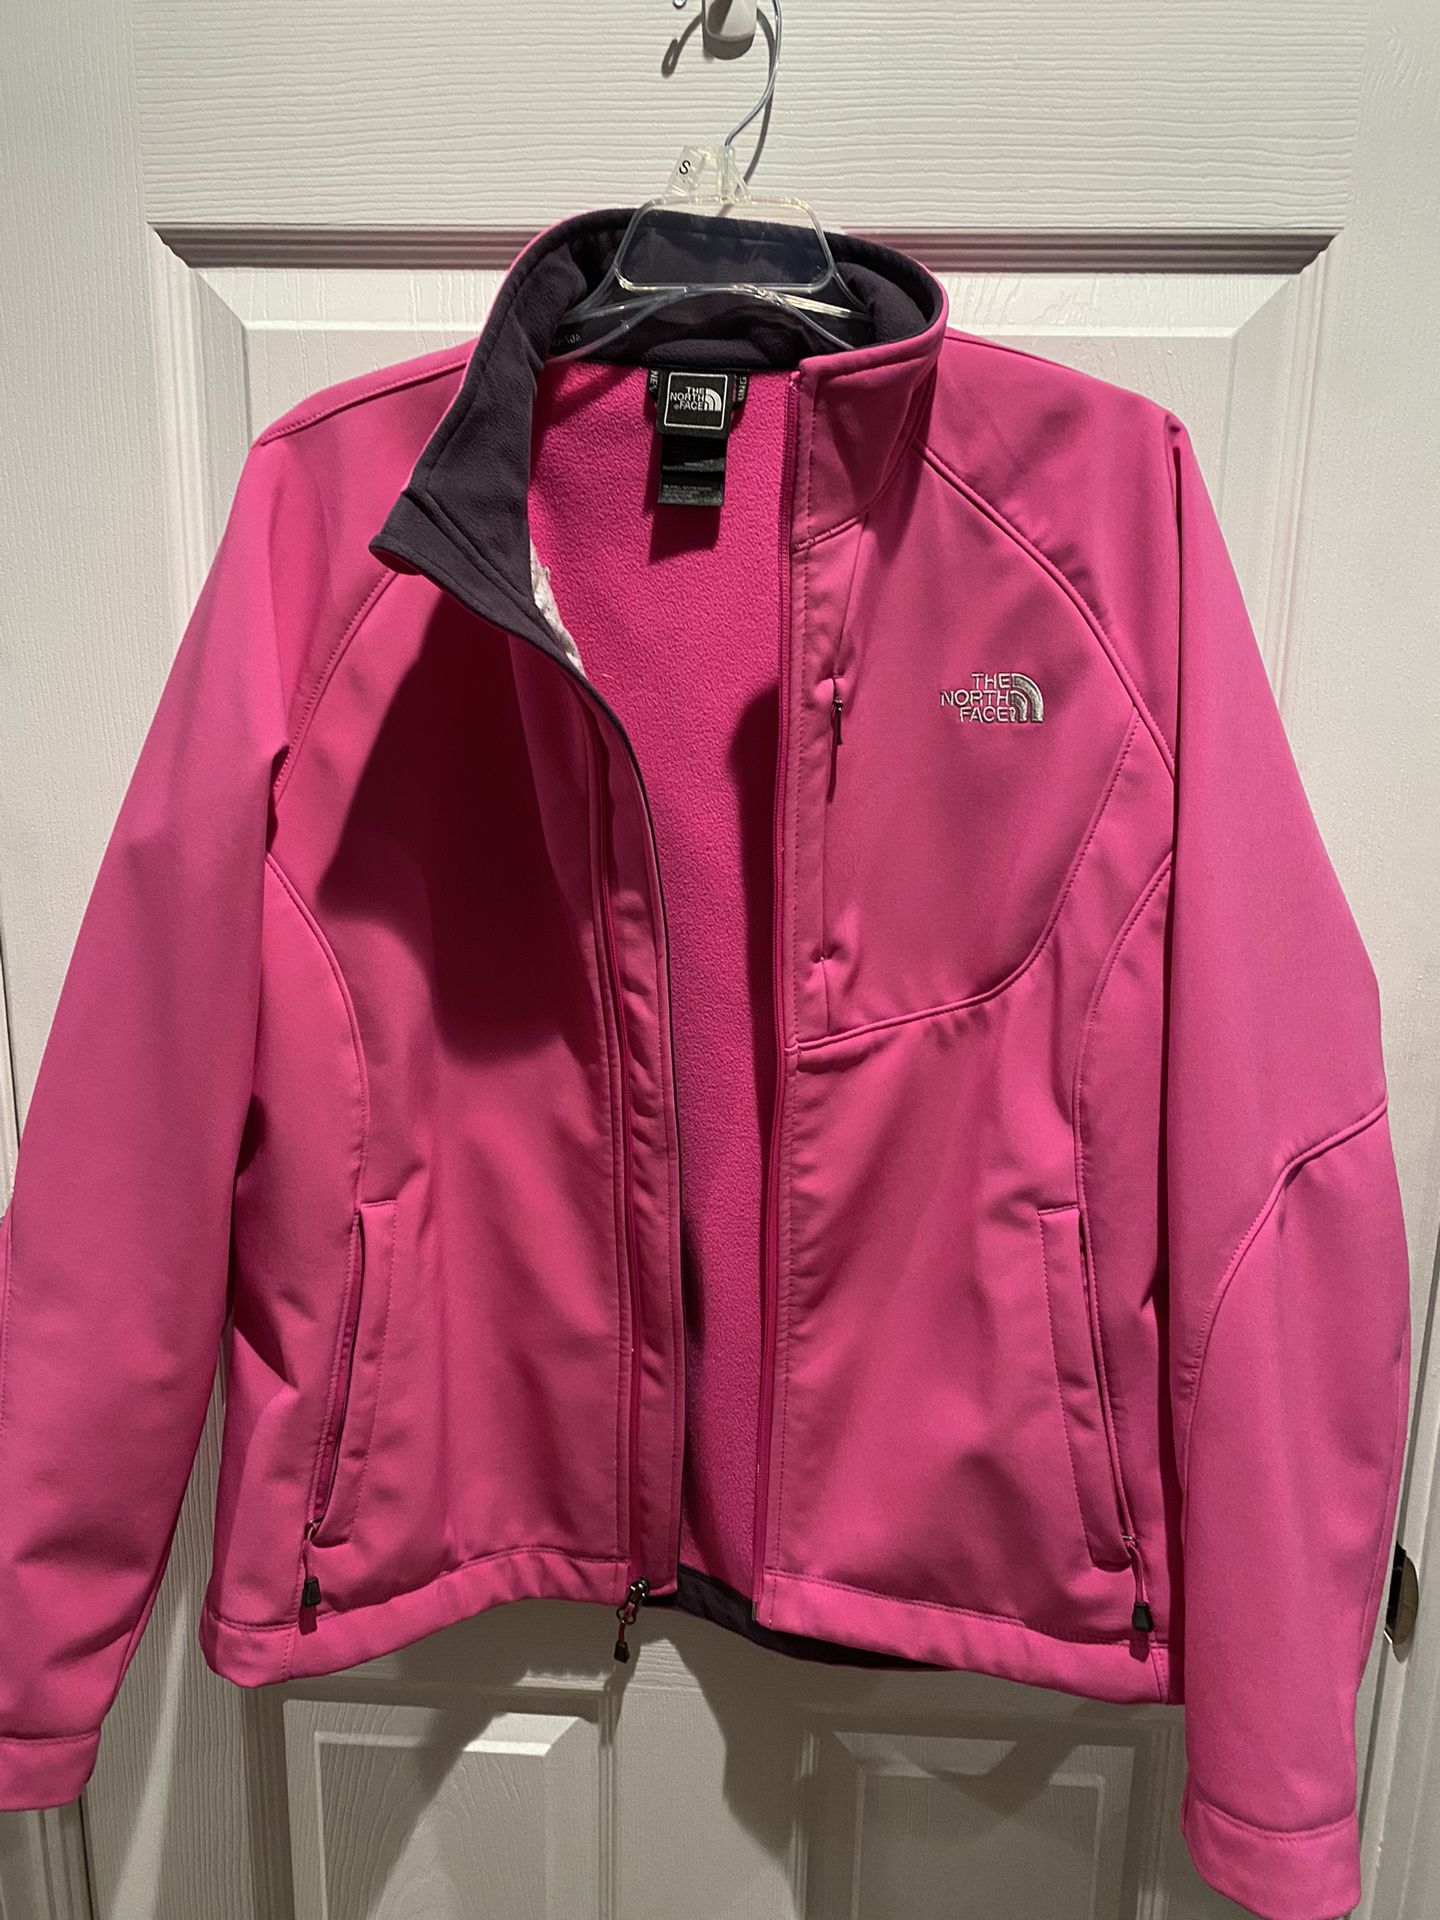 Womens Size L Northface Jacket - Hot Pink And Charcoal Grey